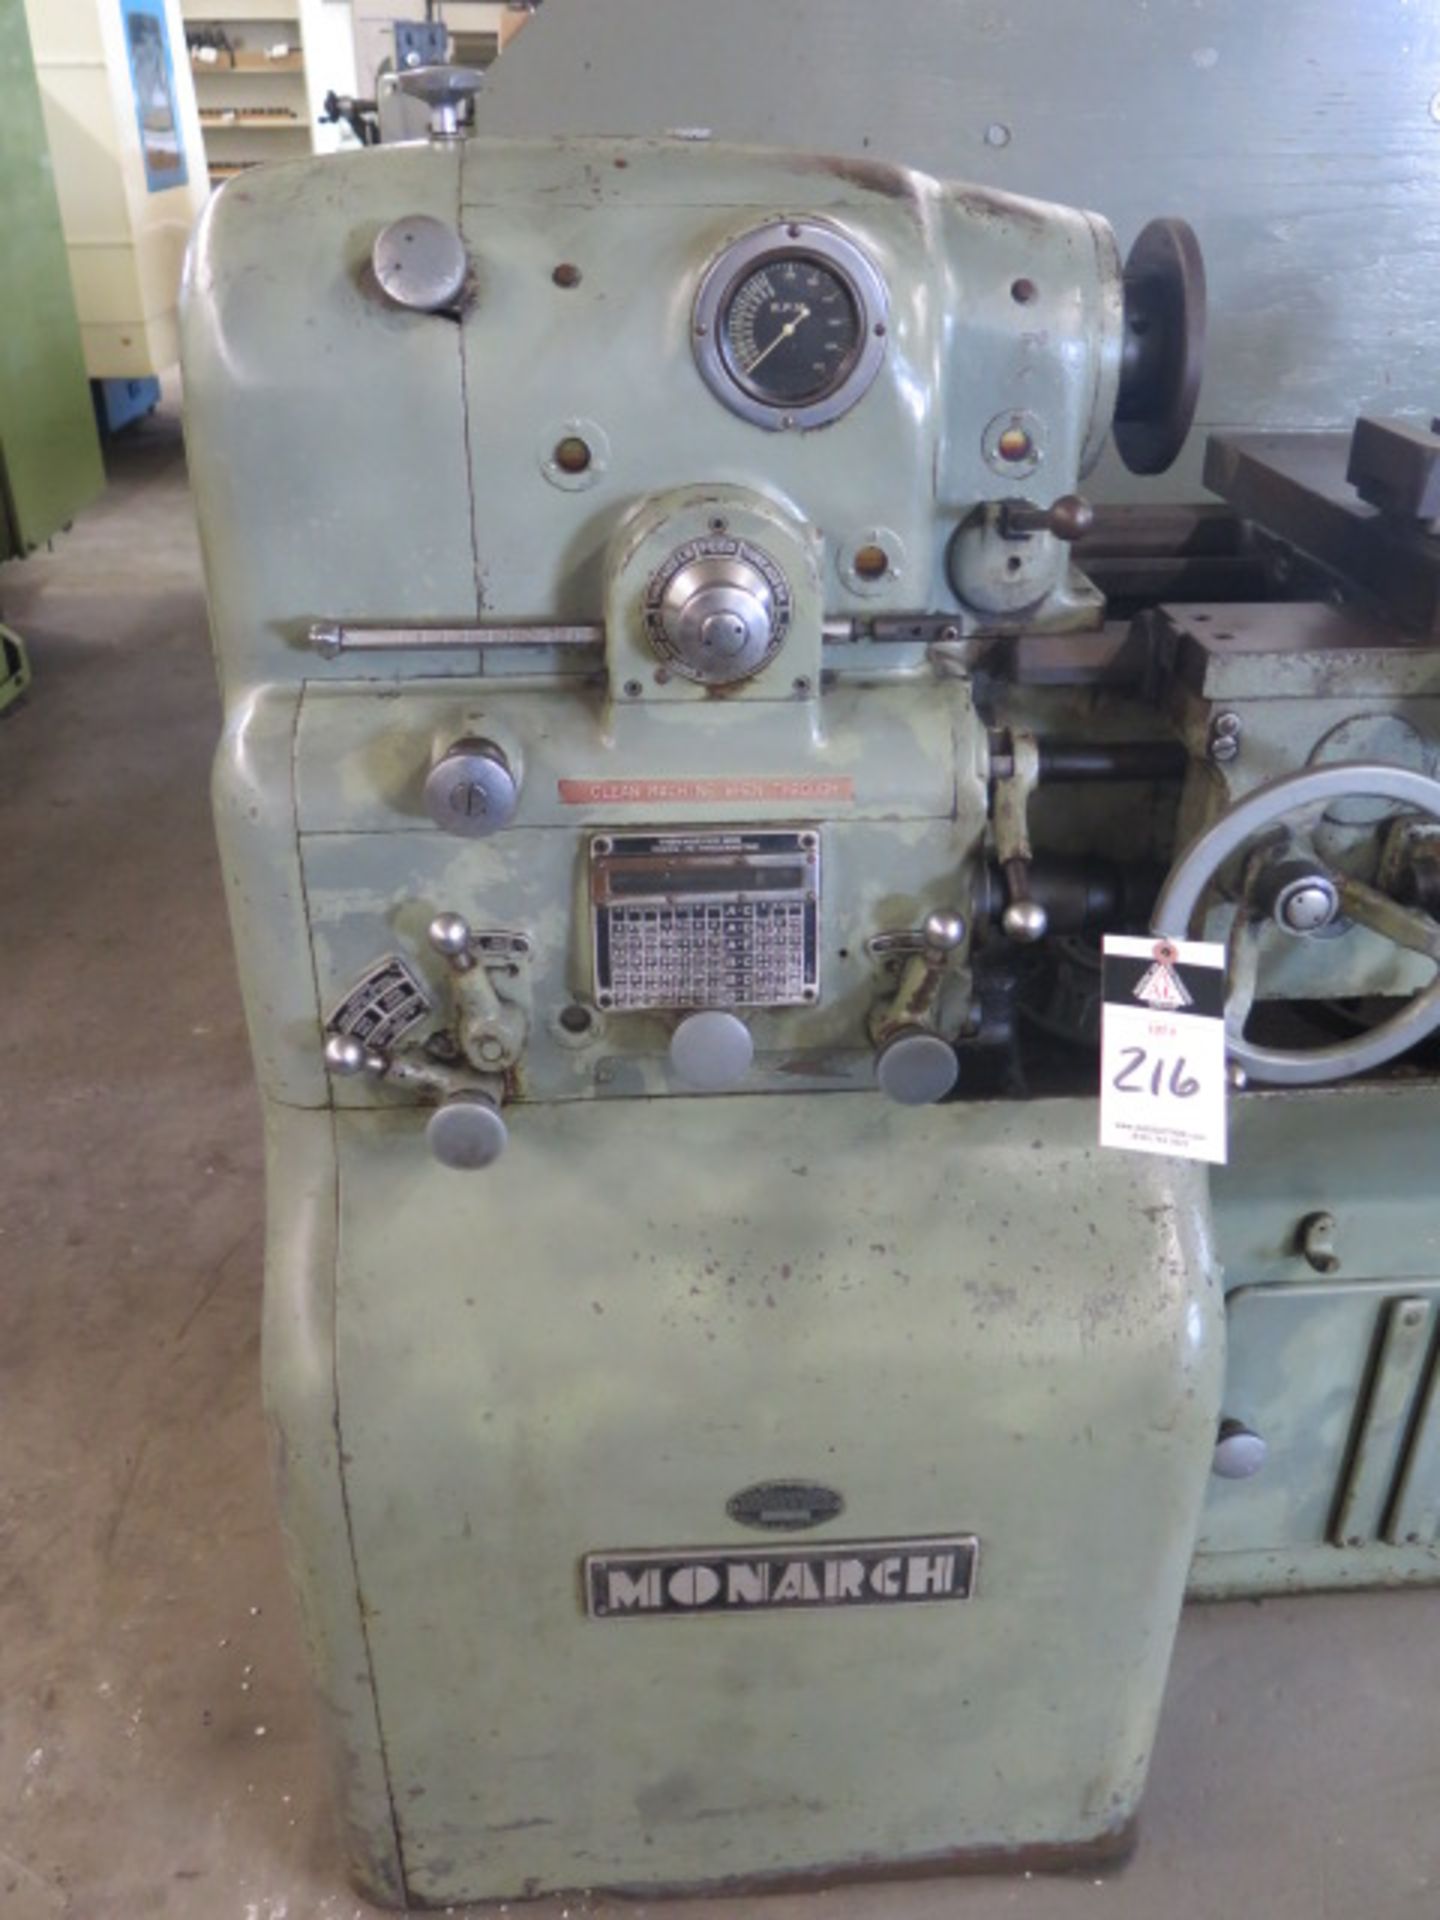 Monarch mdl. 10EE 12 ½” x 20” Tool Room Lathe s/n 28905 w/ 2500 Max RPM, Dial RPM Gage, Inch - Image 5 of 9